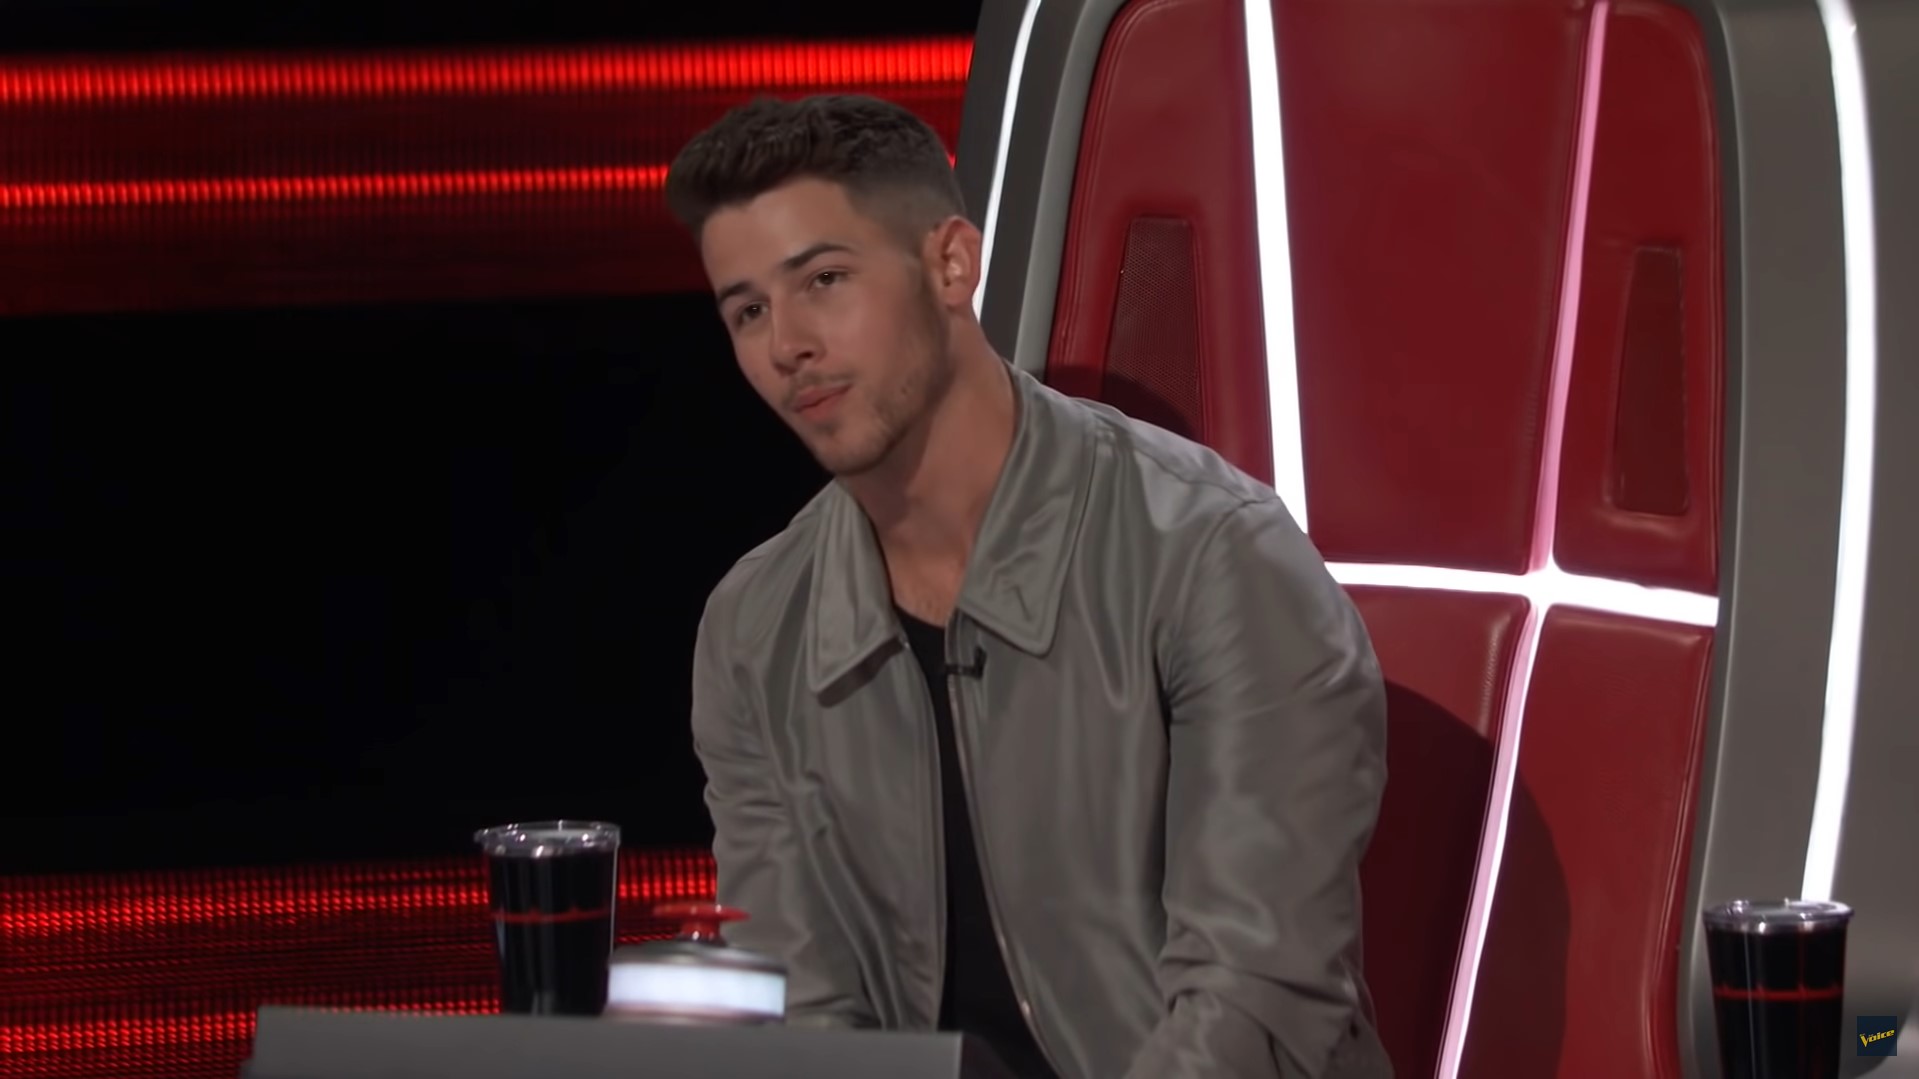 Why Did Nick Jonas Leave The Voice? Why is He Not on The Show?